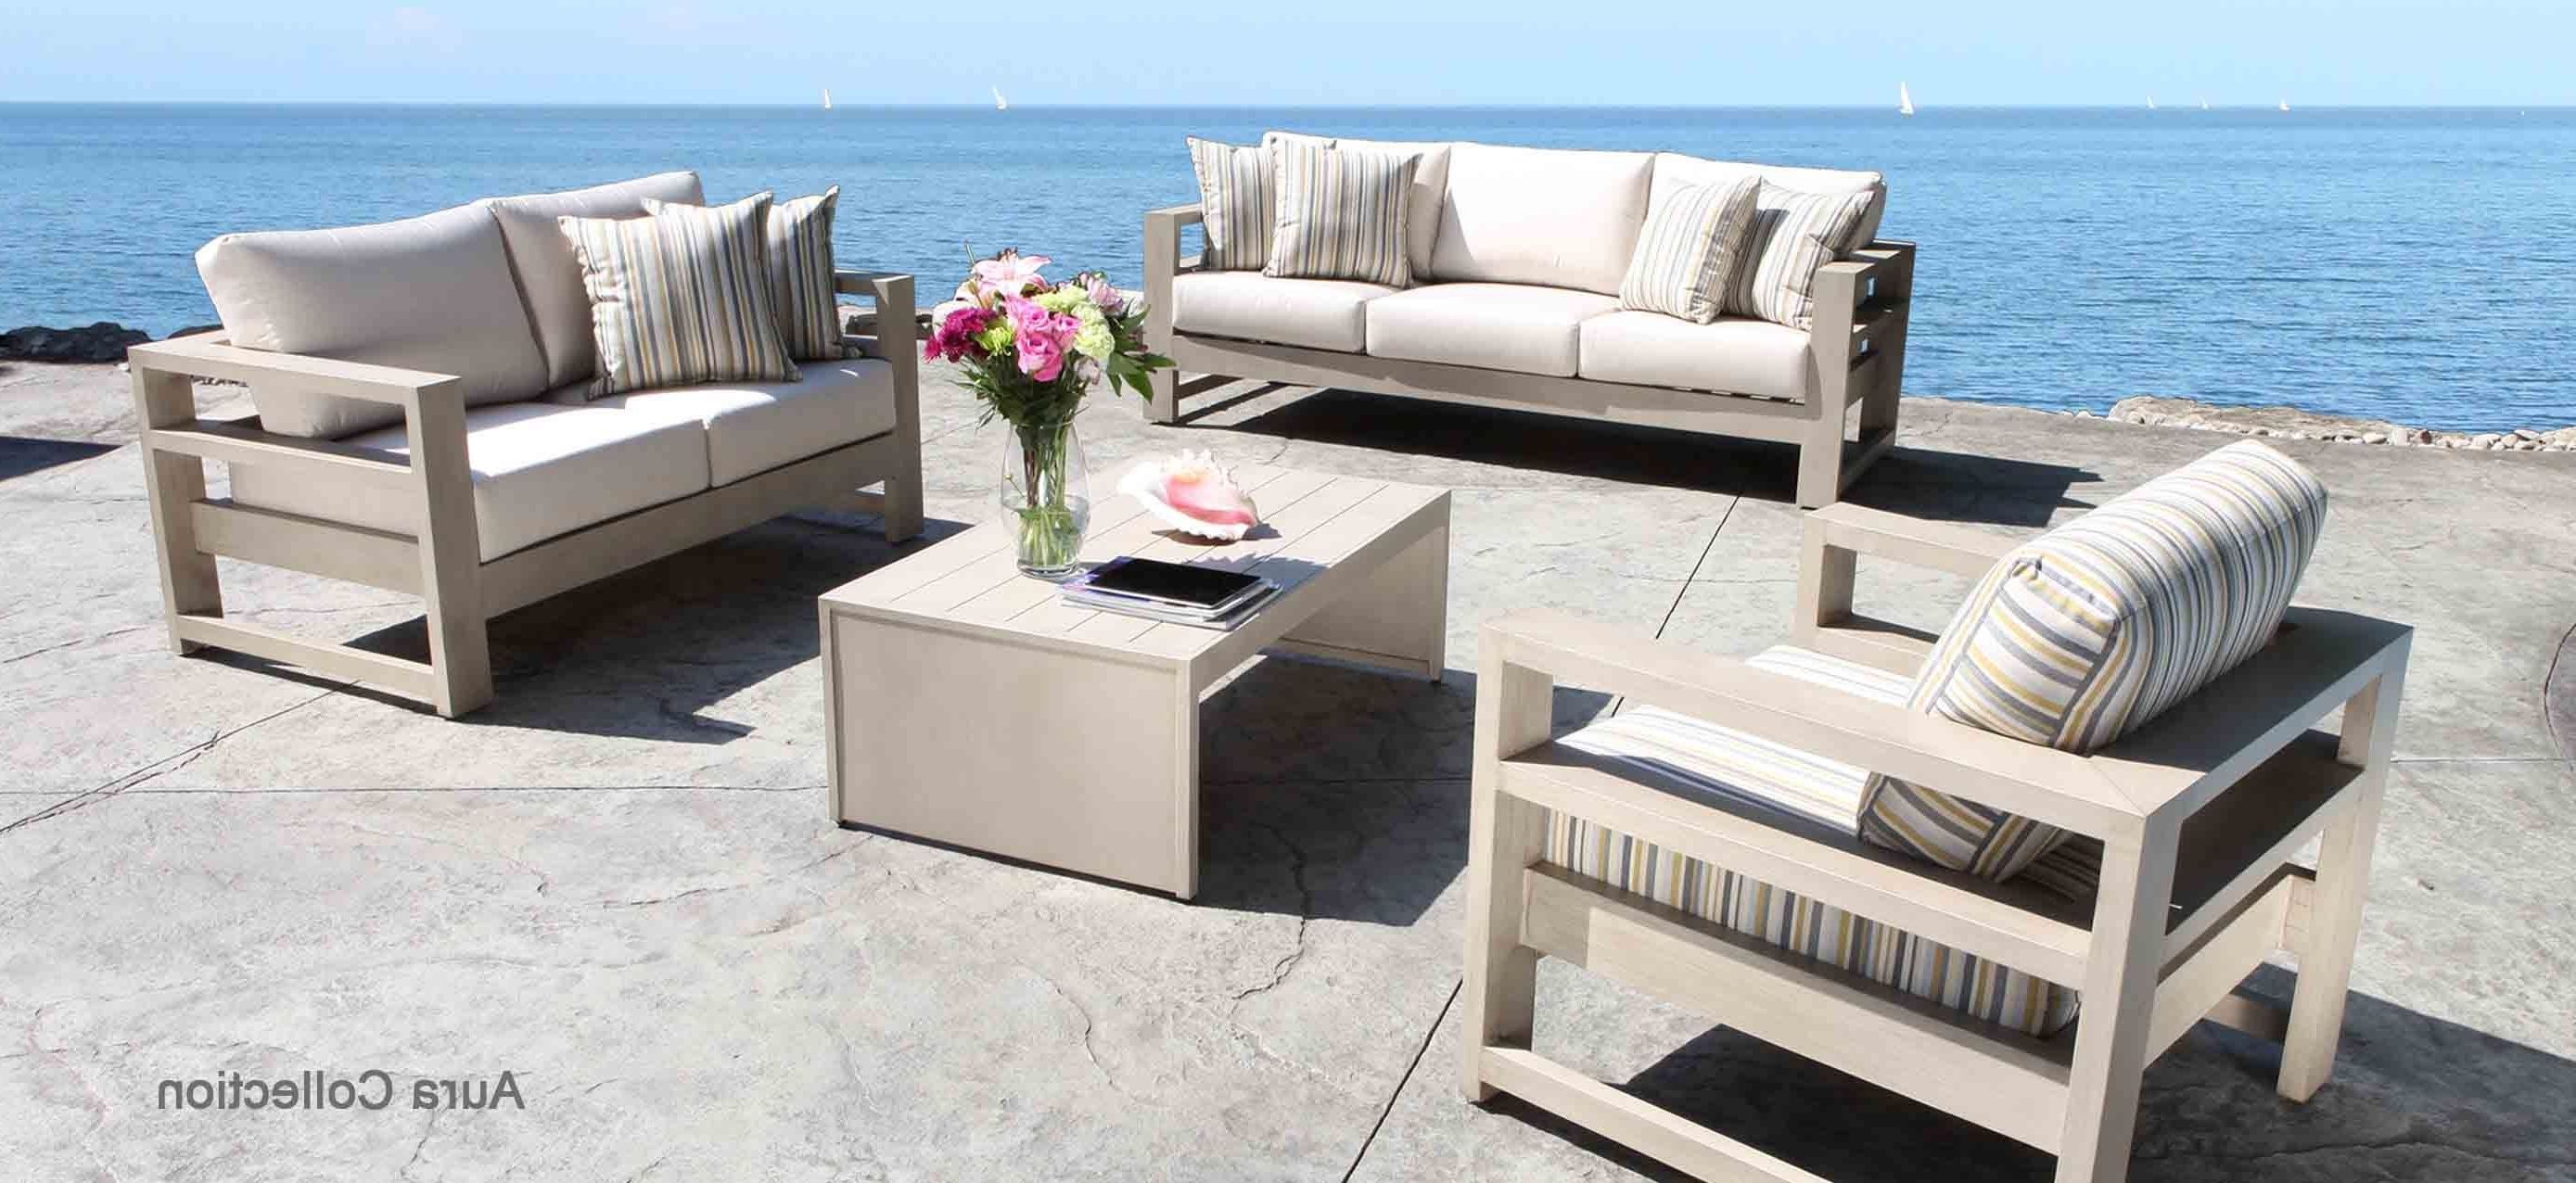 Aura Cast Aluminum Patio Furniture Conversation Set With A Modern Intended For Well Liked Modern Patio Conversation Sets (View 1 of 20)